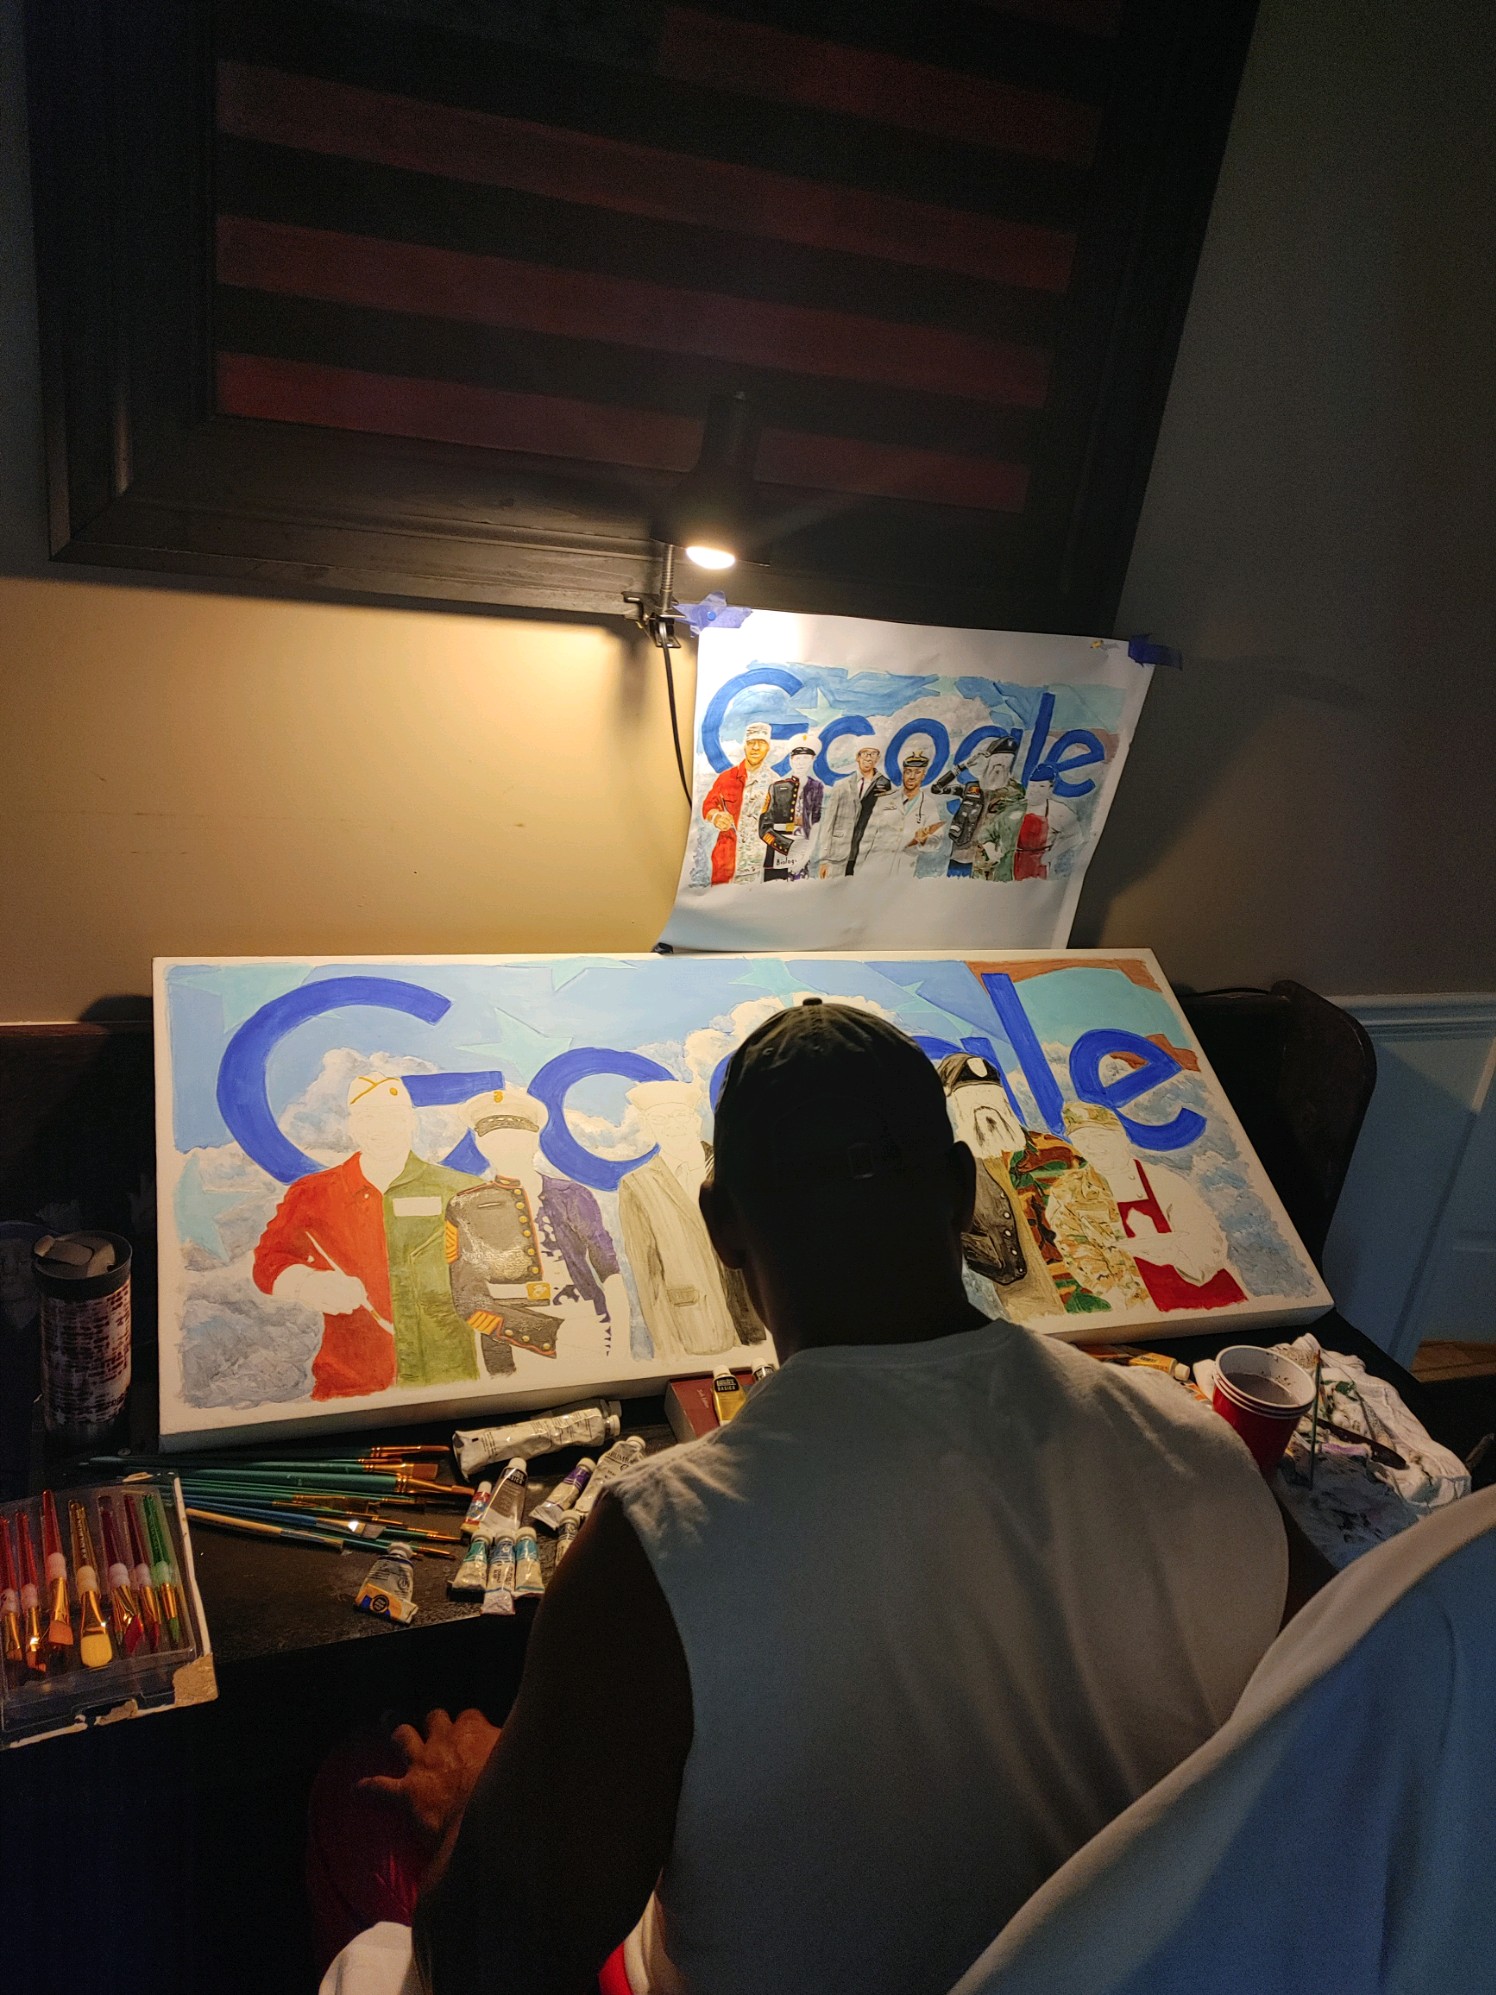 Steve Tette sits at the Google doodle canvas painting.